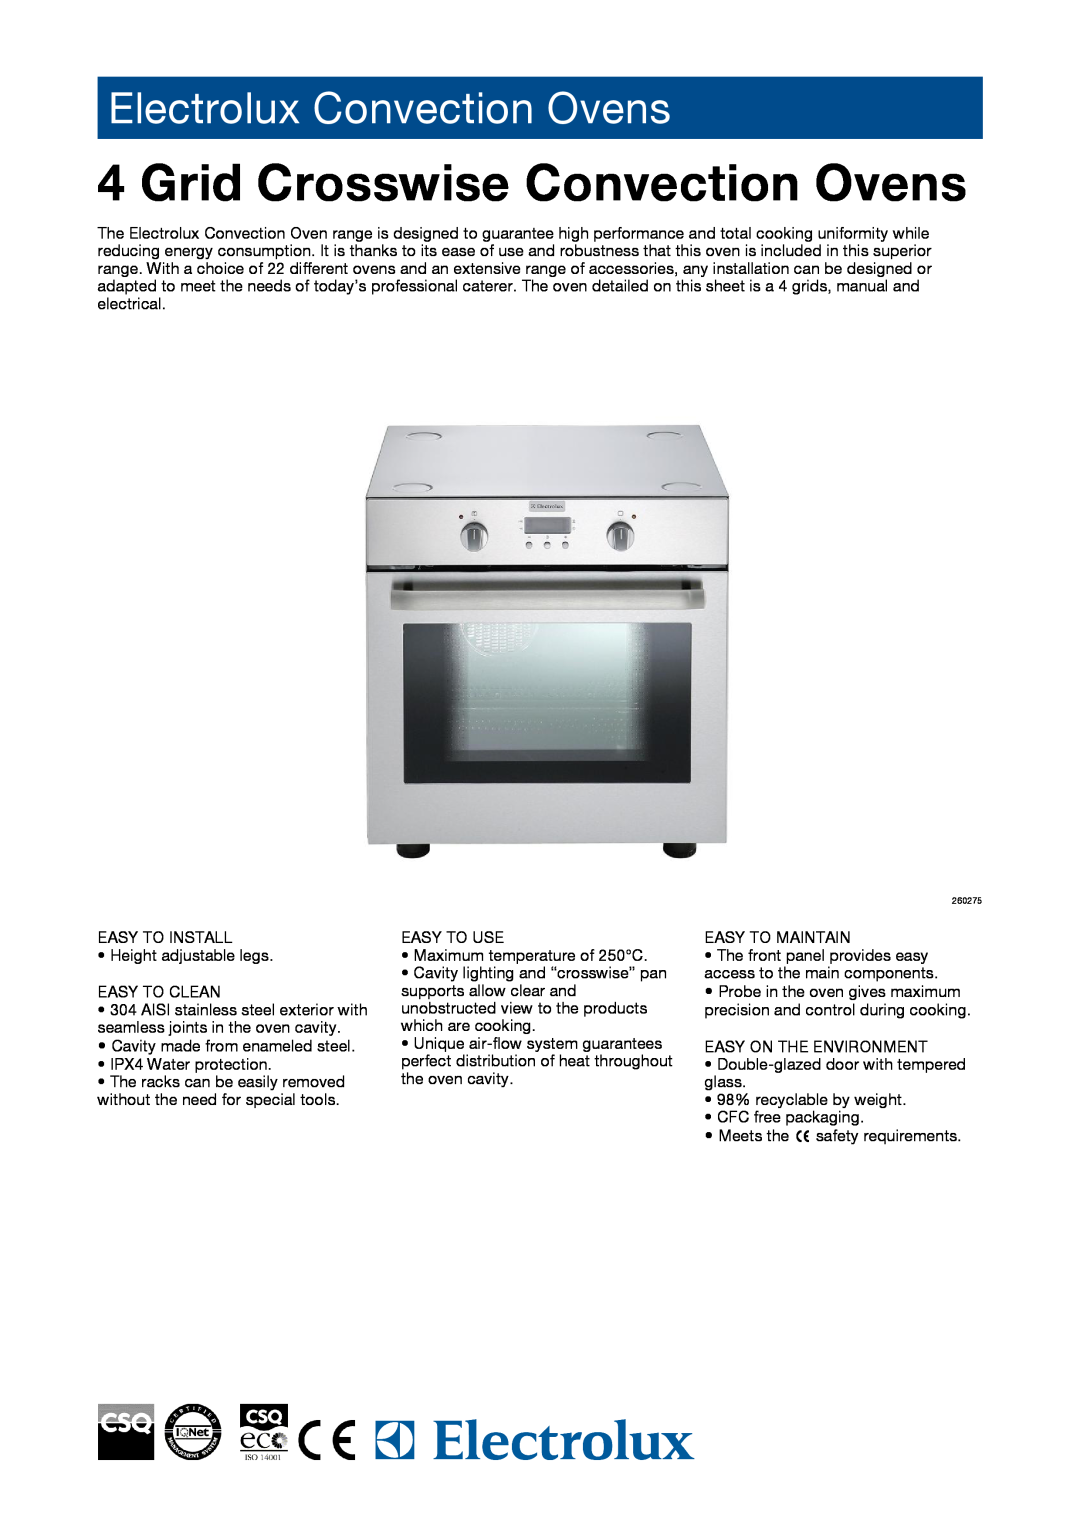 Electrolux FCE043L manual Crosswise Convection, Electric Convection Oven - 4 Grids, Electrolux Professional 